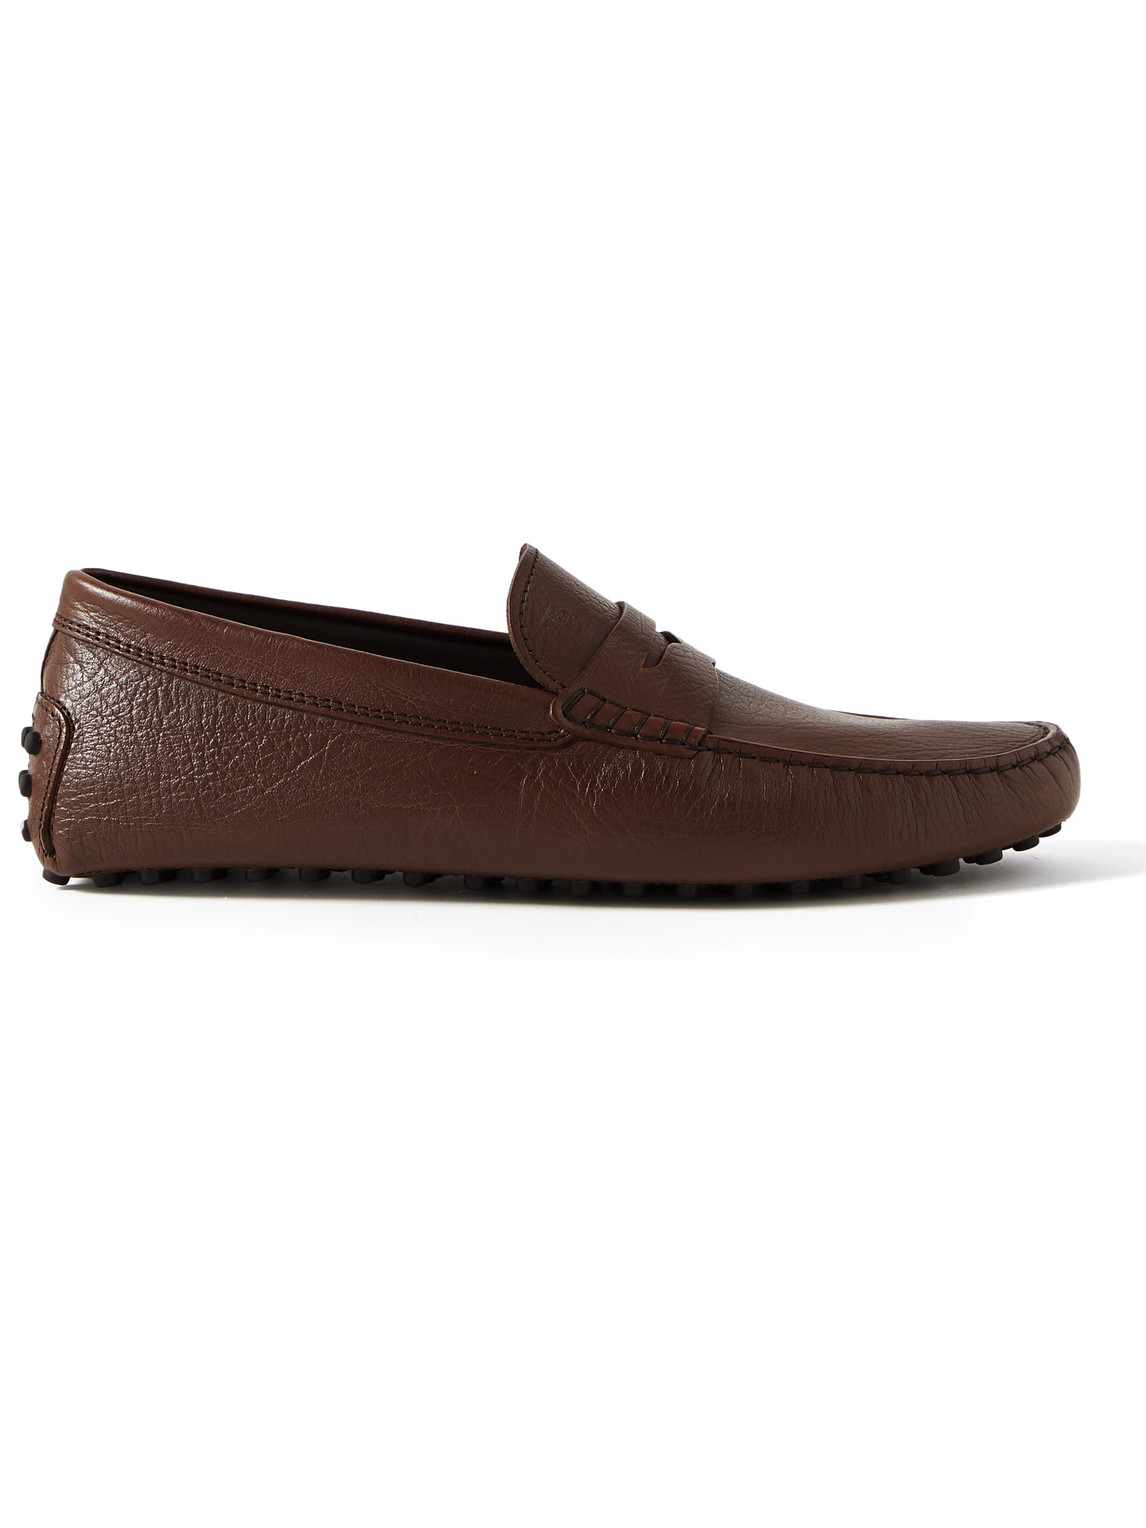 TOD'S GOMMINO FULL-GRAIN LEATHER DRIVING SHOES